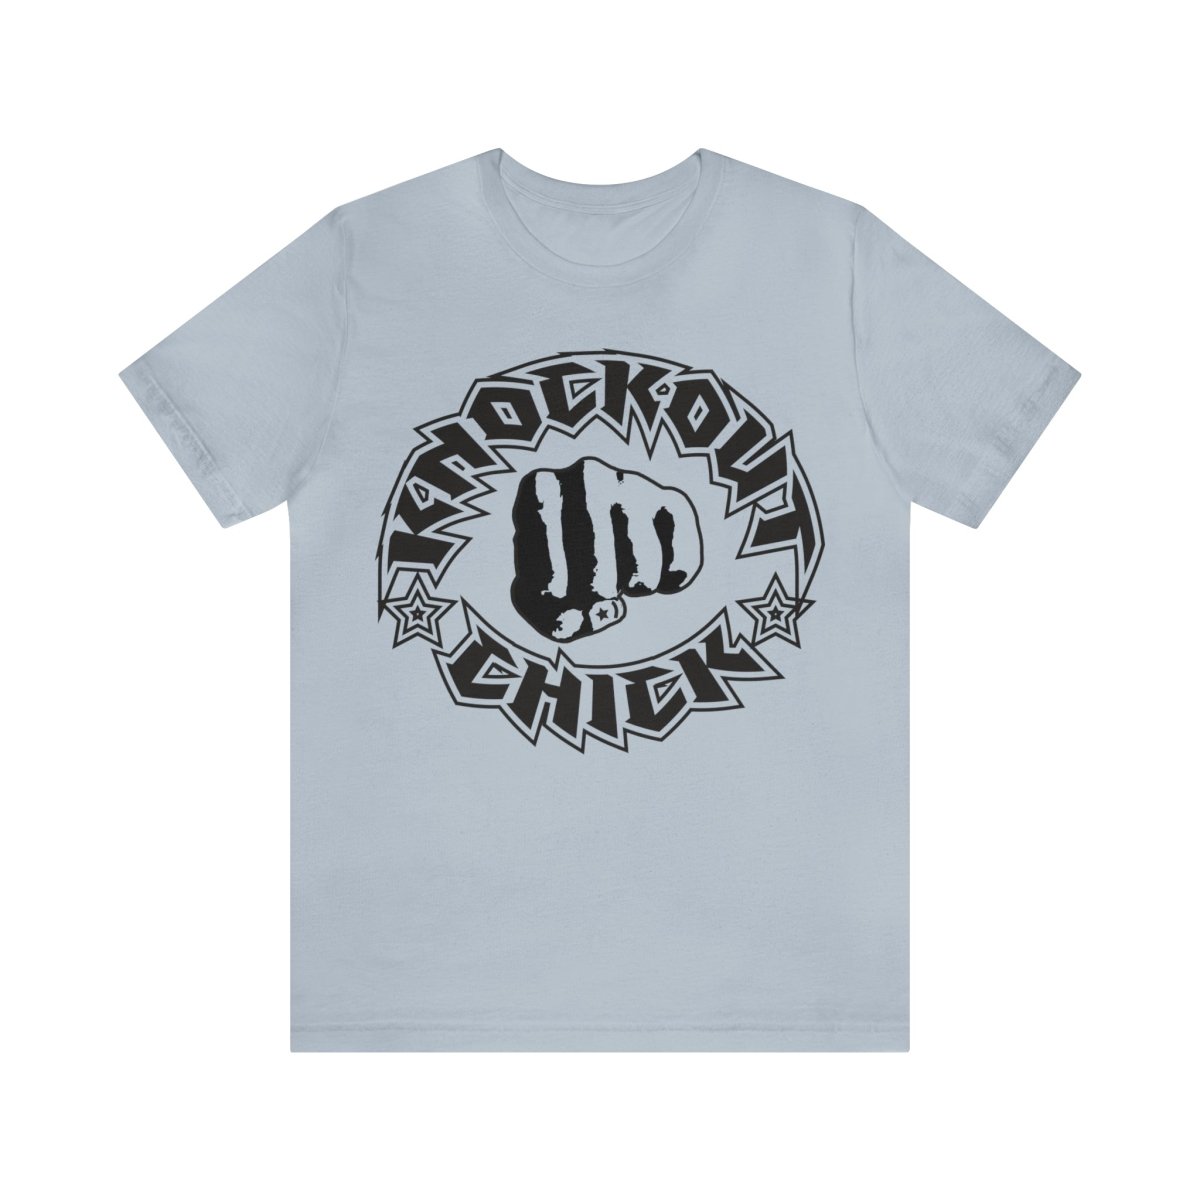 Knockout Chick Premium T-Shirt, Gym, Kickboxing, Training, Workout, Tough, Fitness Gift for Her